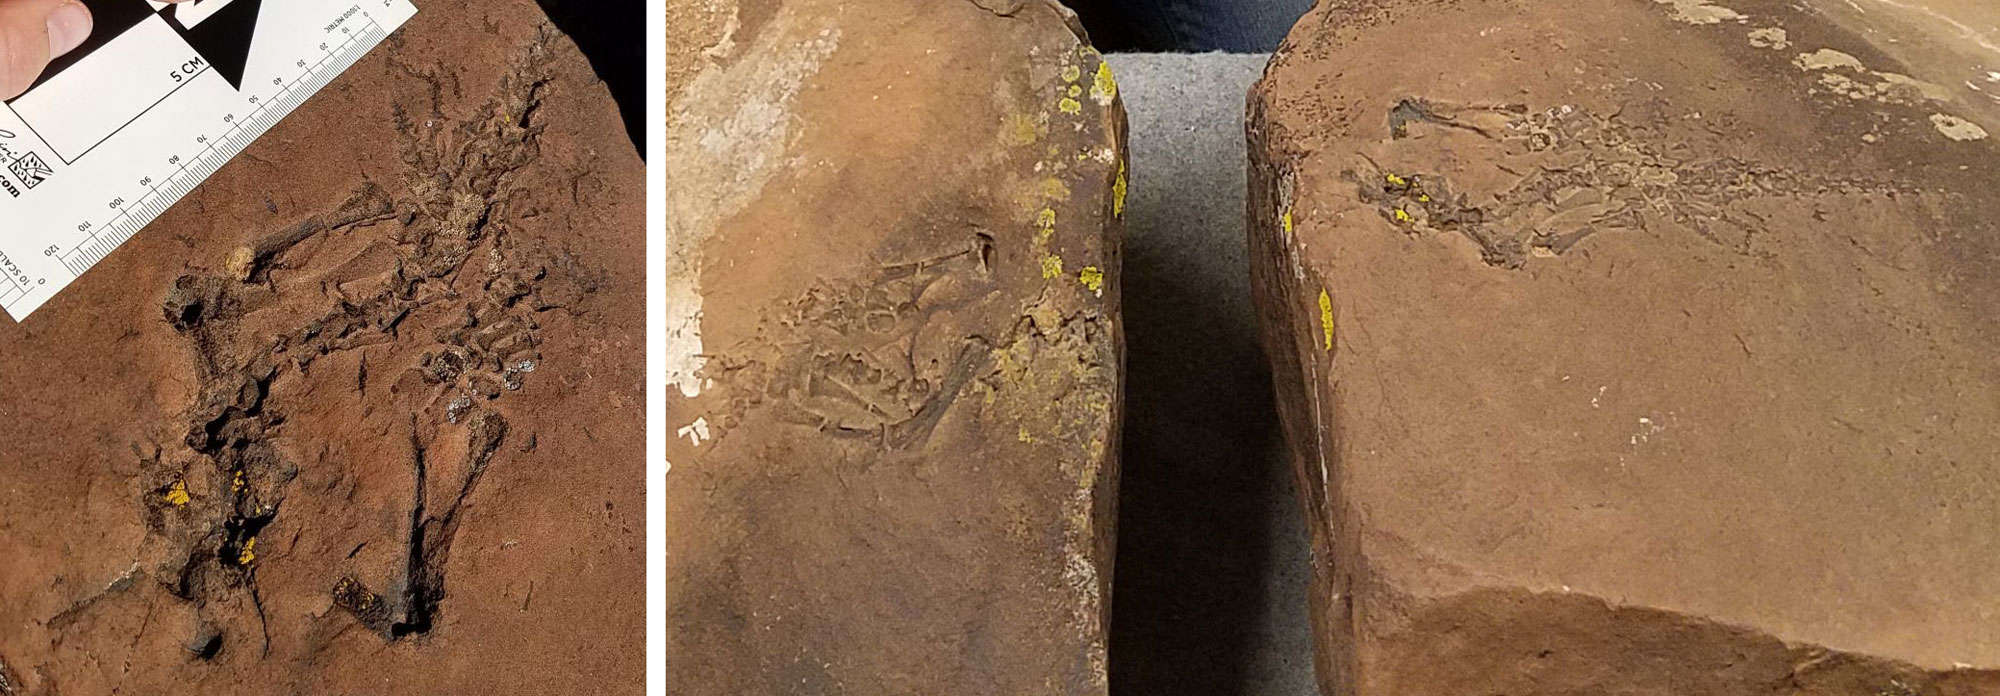 2-panel figure showing photos of a fossil vertebrate discovered in the Permian Arroyo de Alamillo Formation of New Mexico. Panel 1: Back end of the animal showing bones of the rear leg and tail. Panel 2: Same specimen with its counterpart.